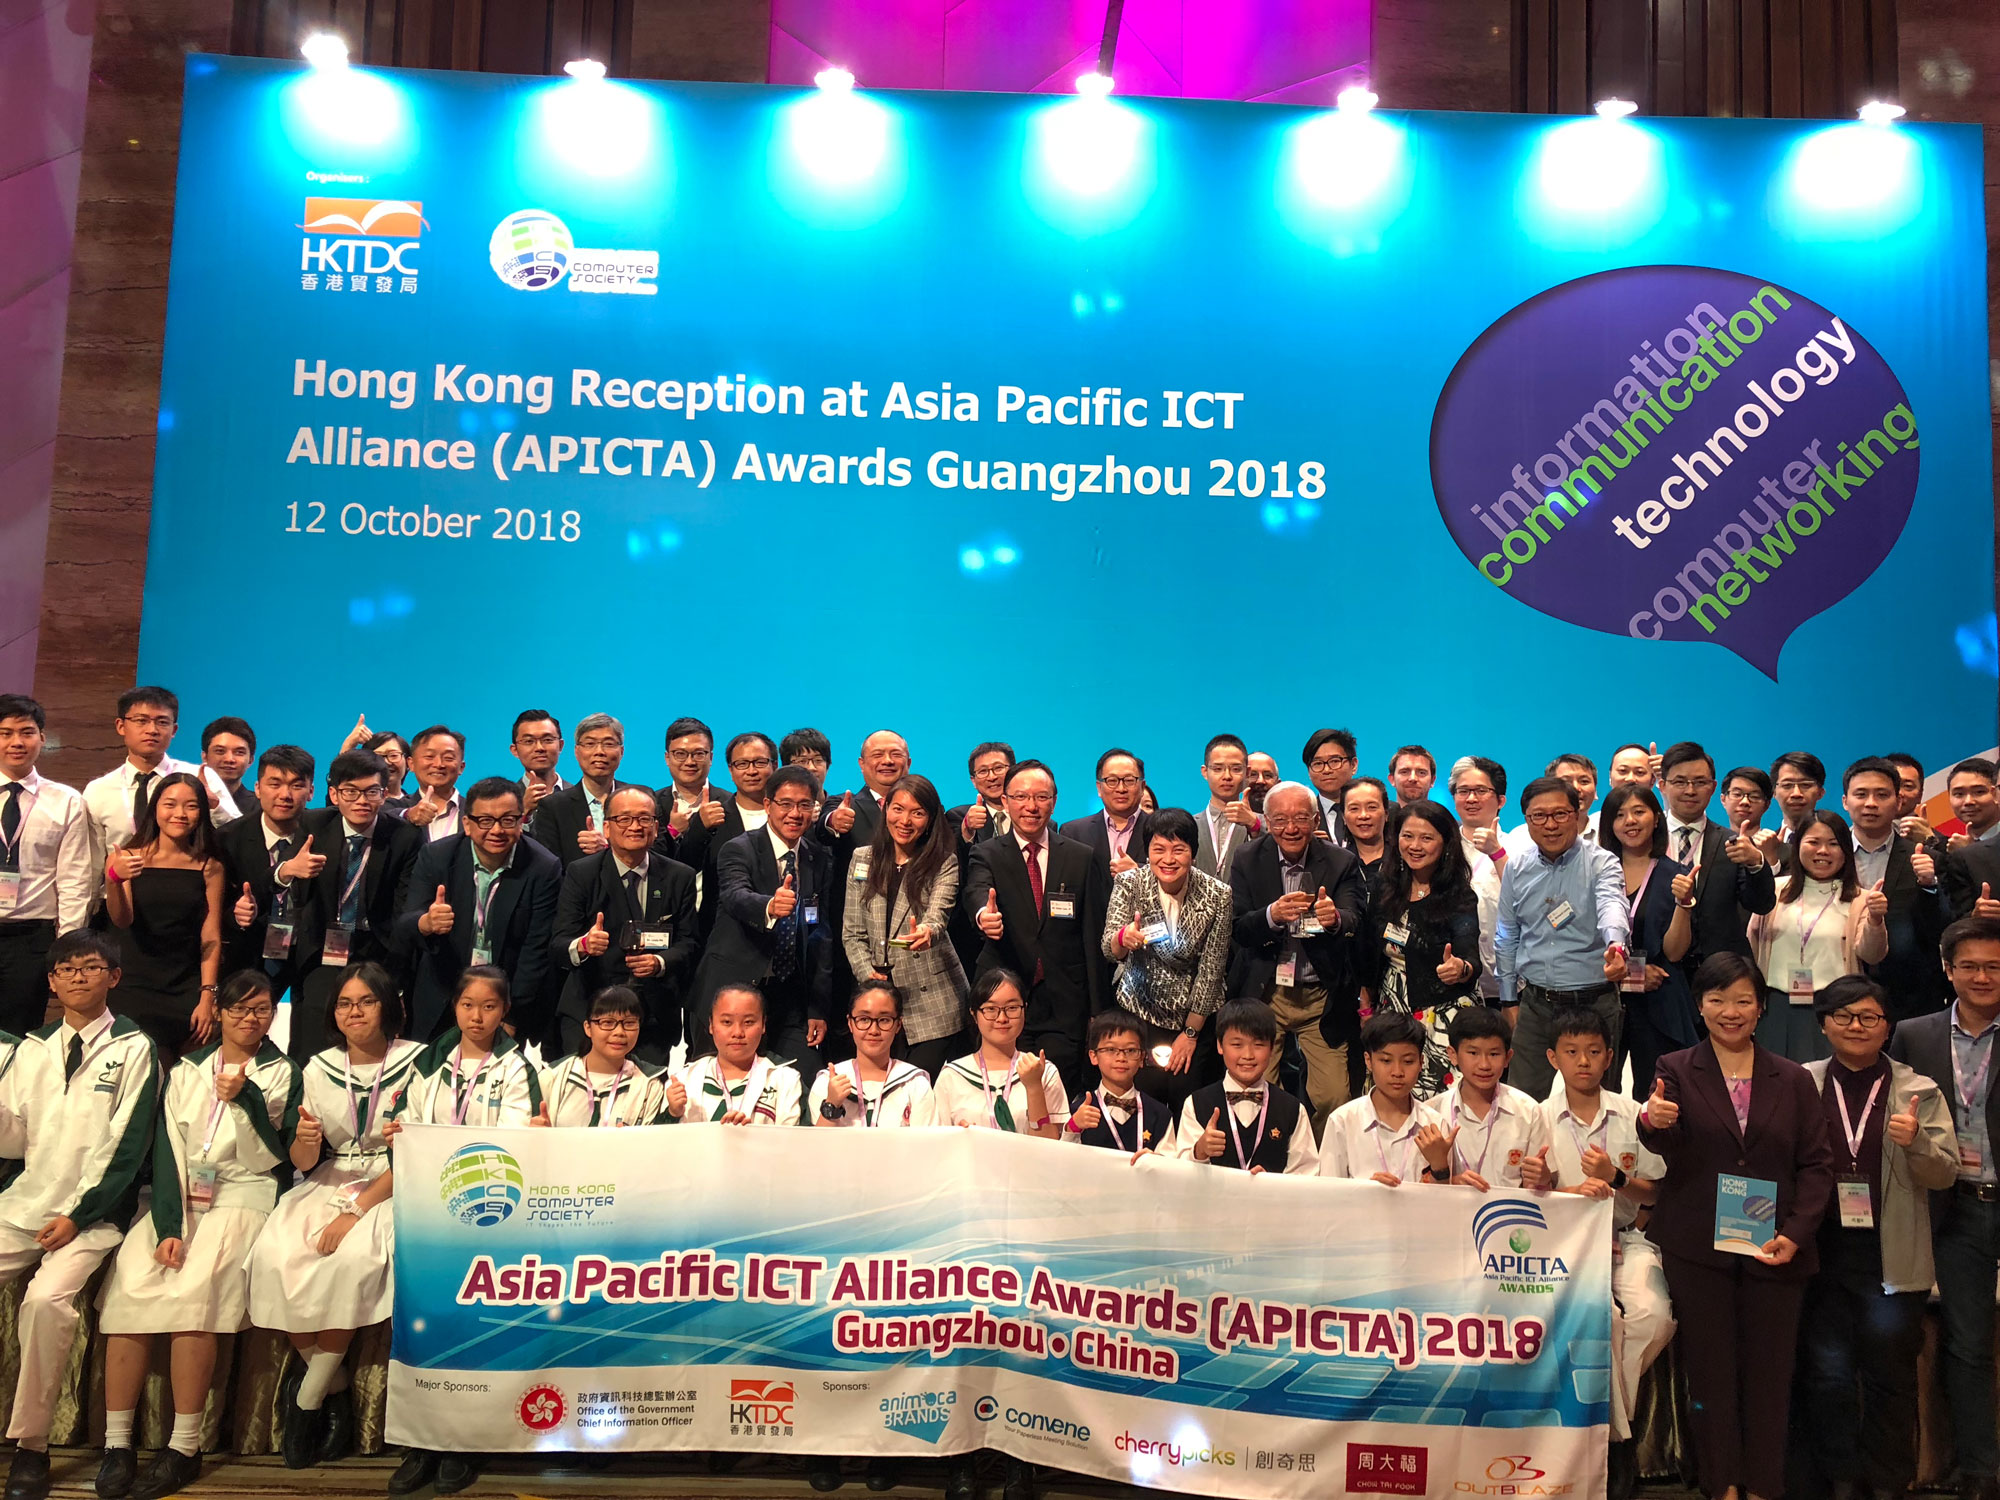 Mr. Victor Lam, Government Chief Information Officer, in group photo with the Hong Kong delegation and other guests at the  "Hong Kong Reception at Asia Pacific ICT Alliance (APICTA) Awards Guangzhou 2018".